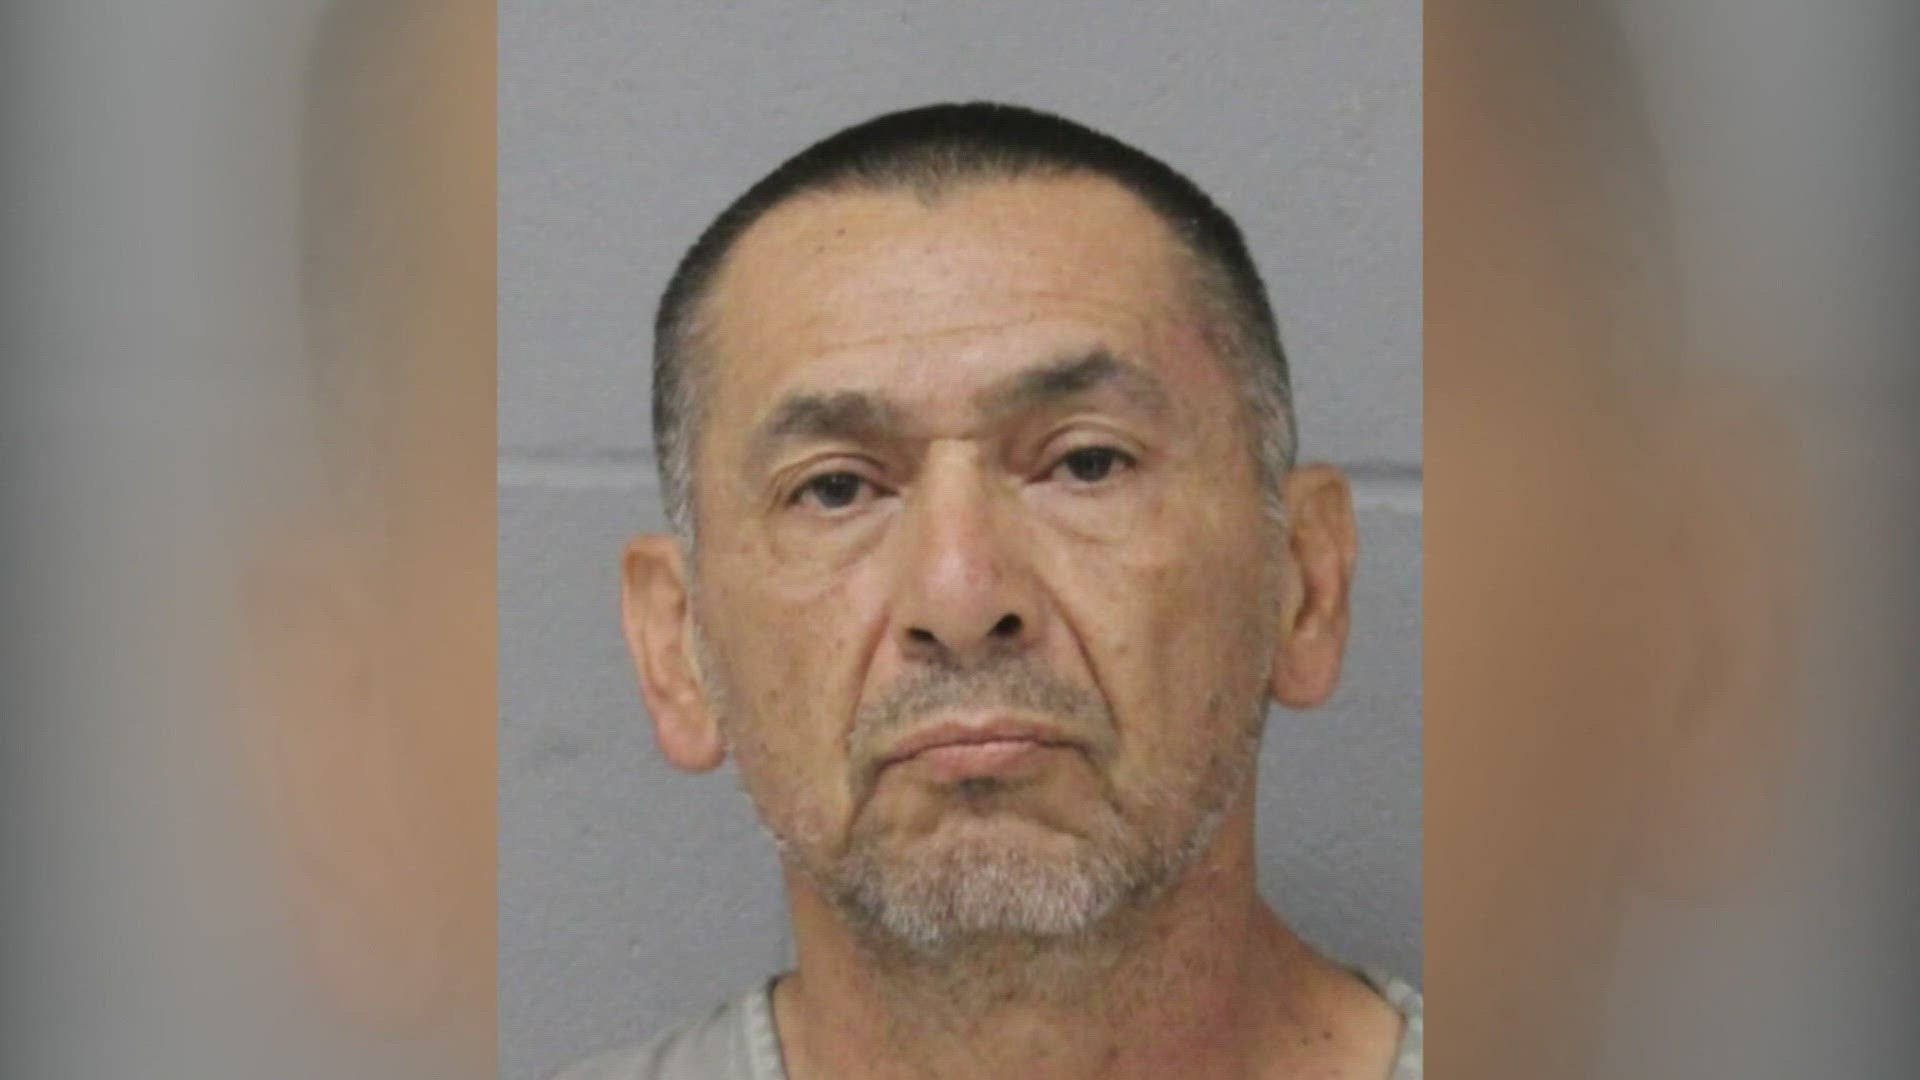 Raul Meza Jr. was convicted in 1982 for the murder of an 8-year-old girl. Police said he could be connected with up to 10 other cold cases.